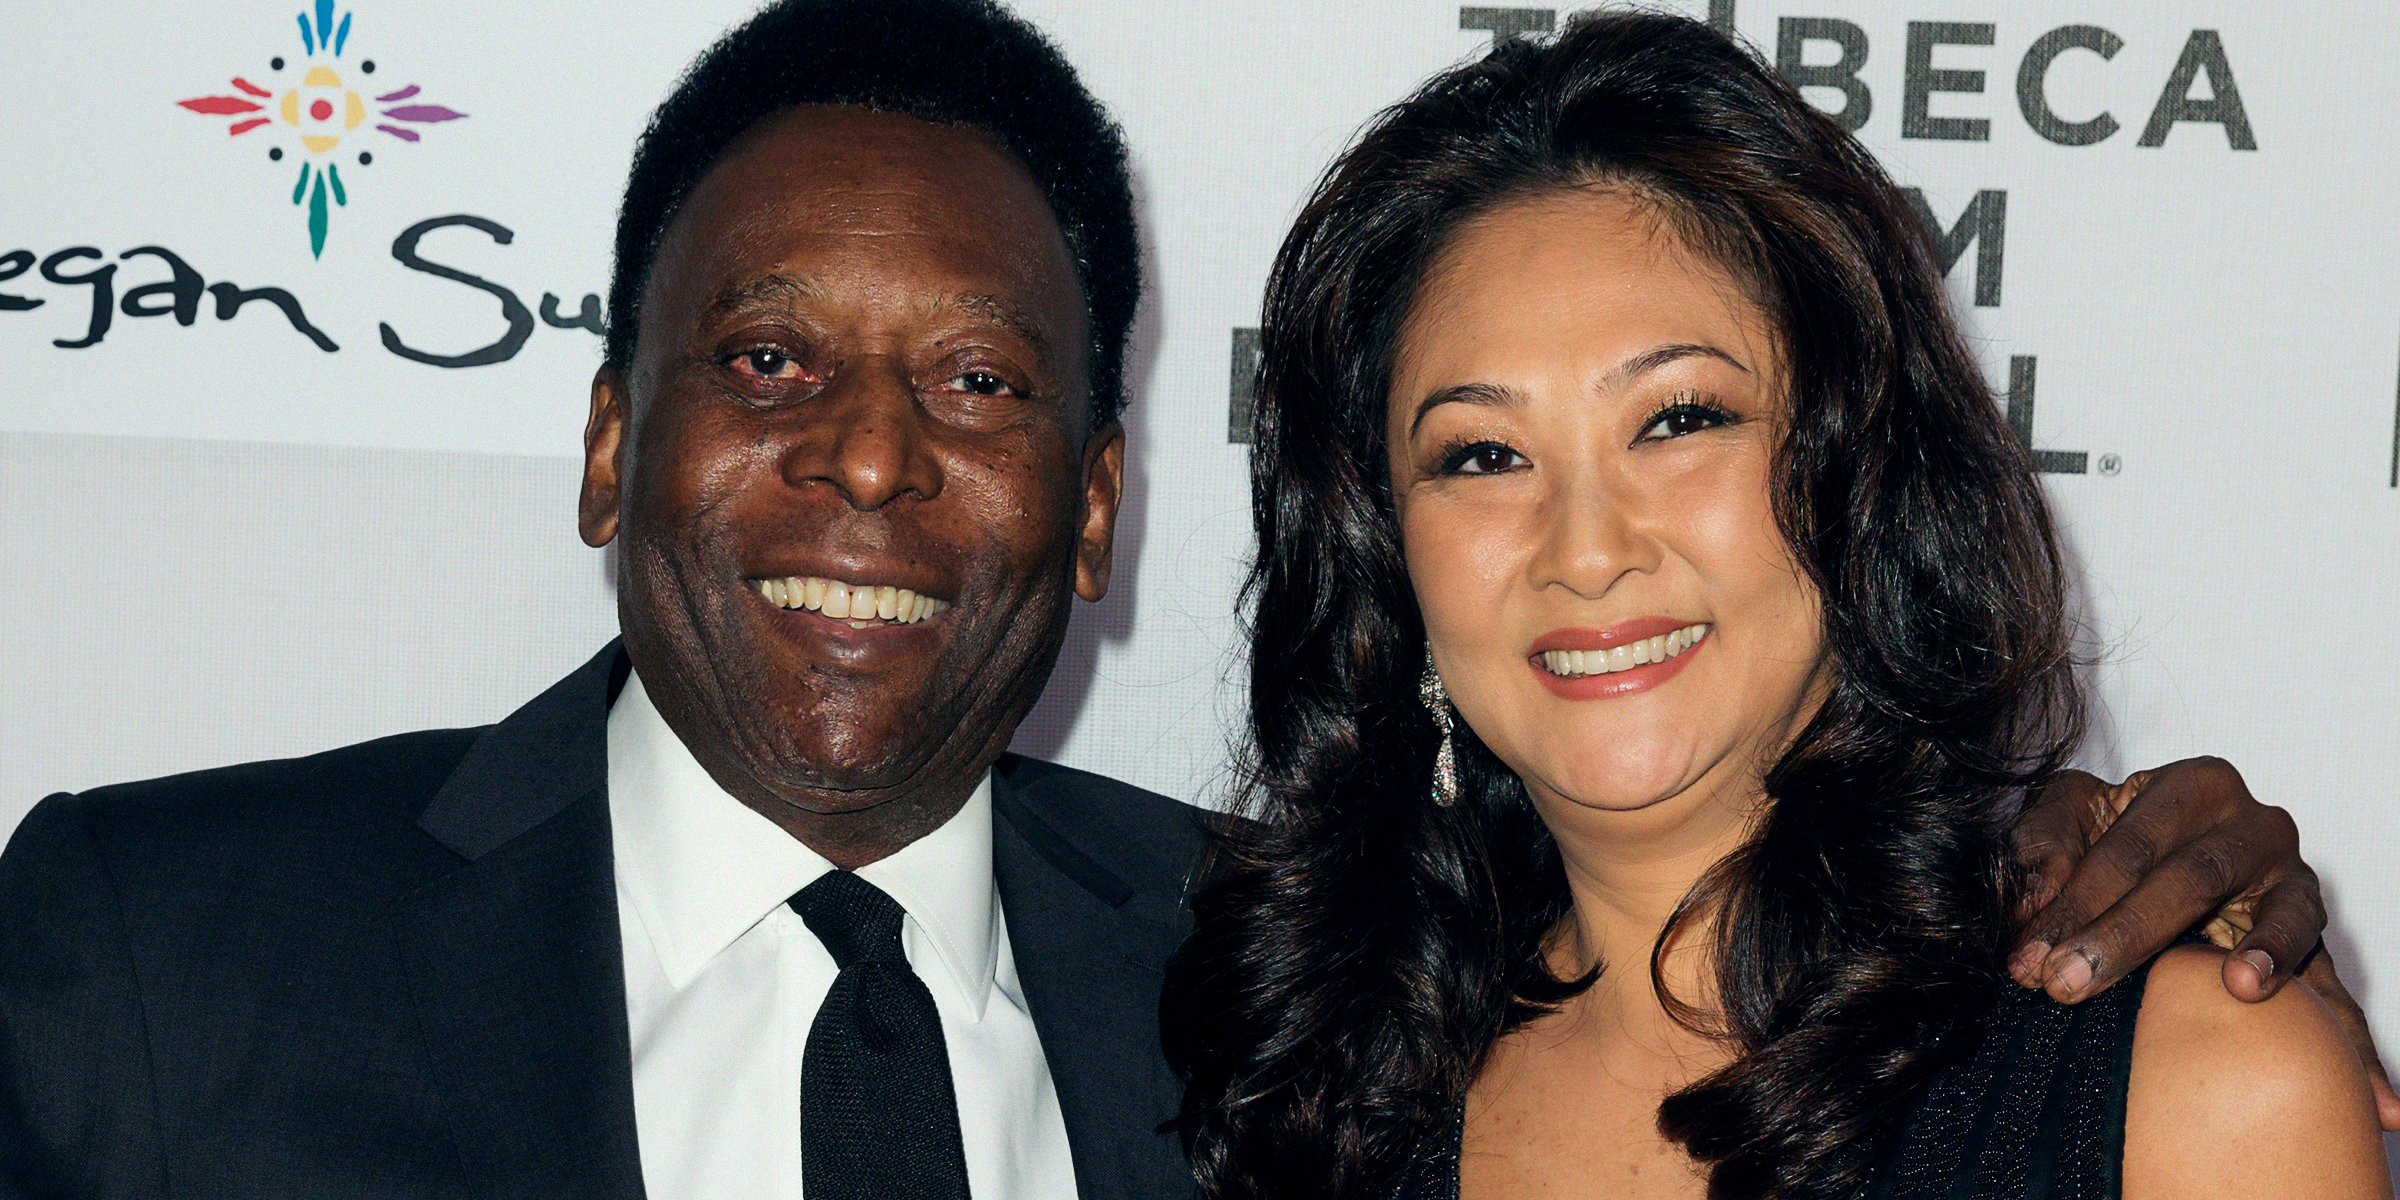 Pelé and Marcia Aoki | Source: Getty Images